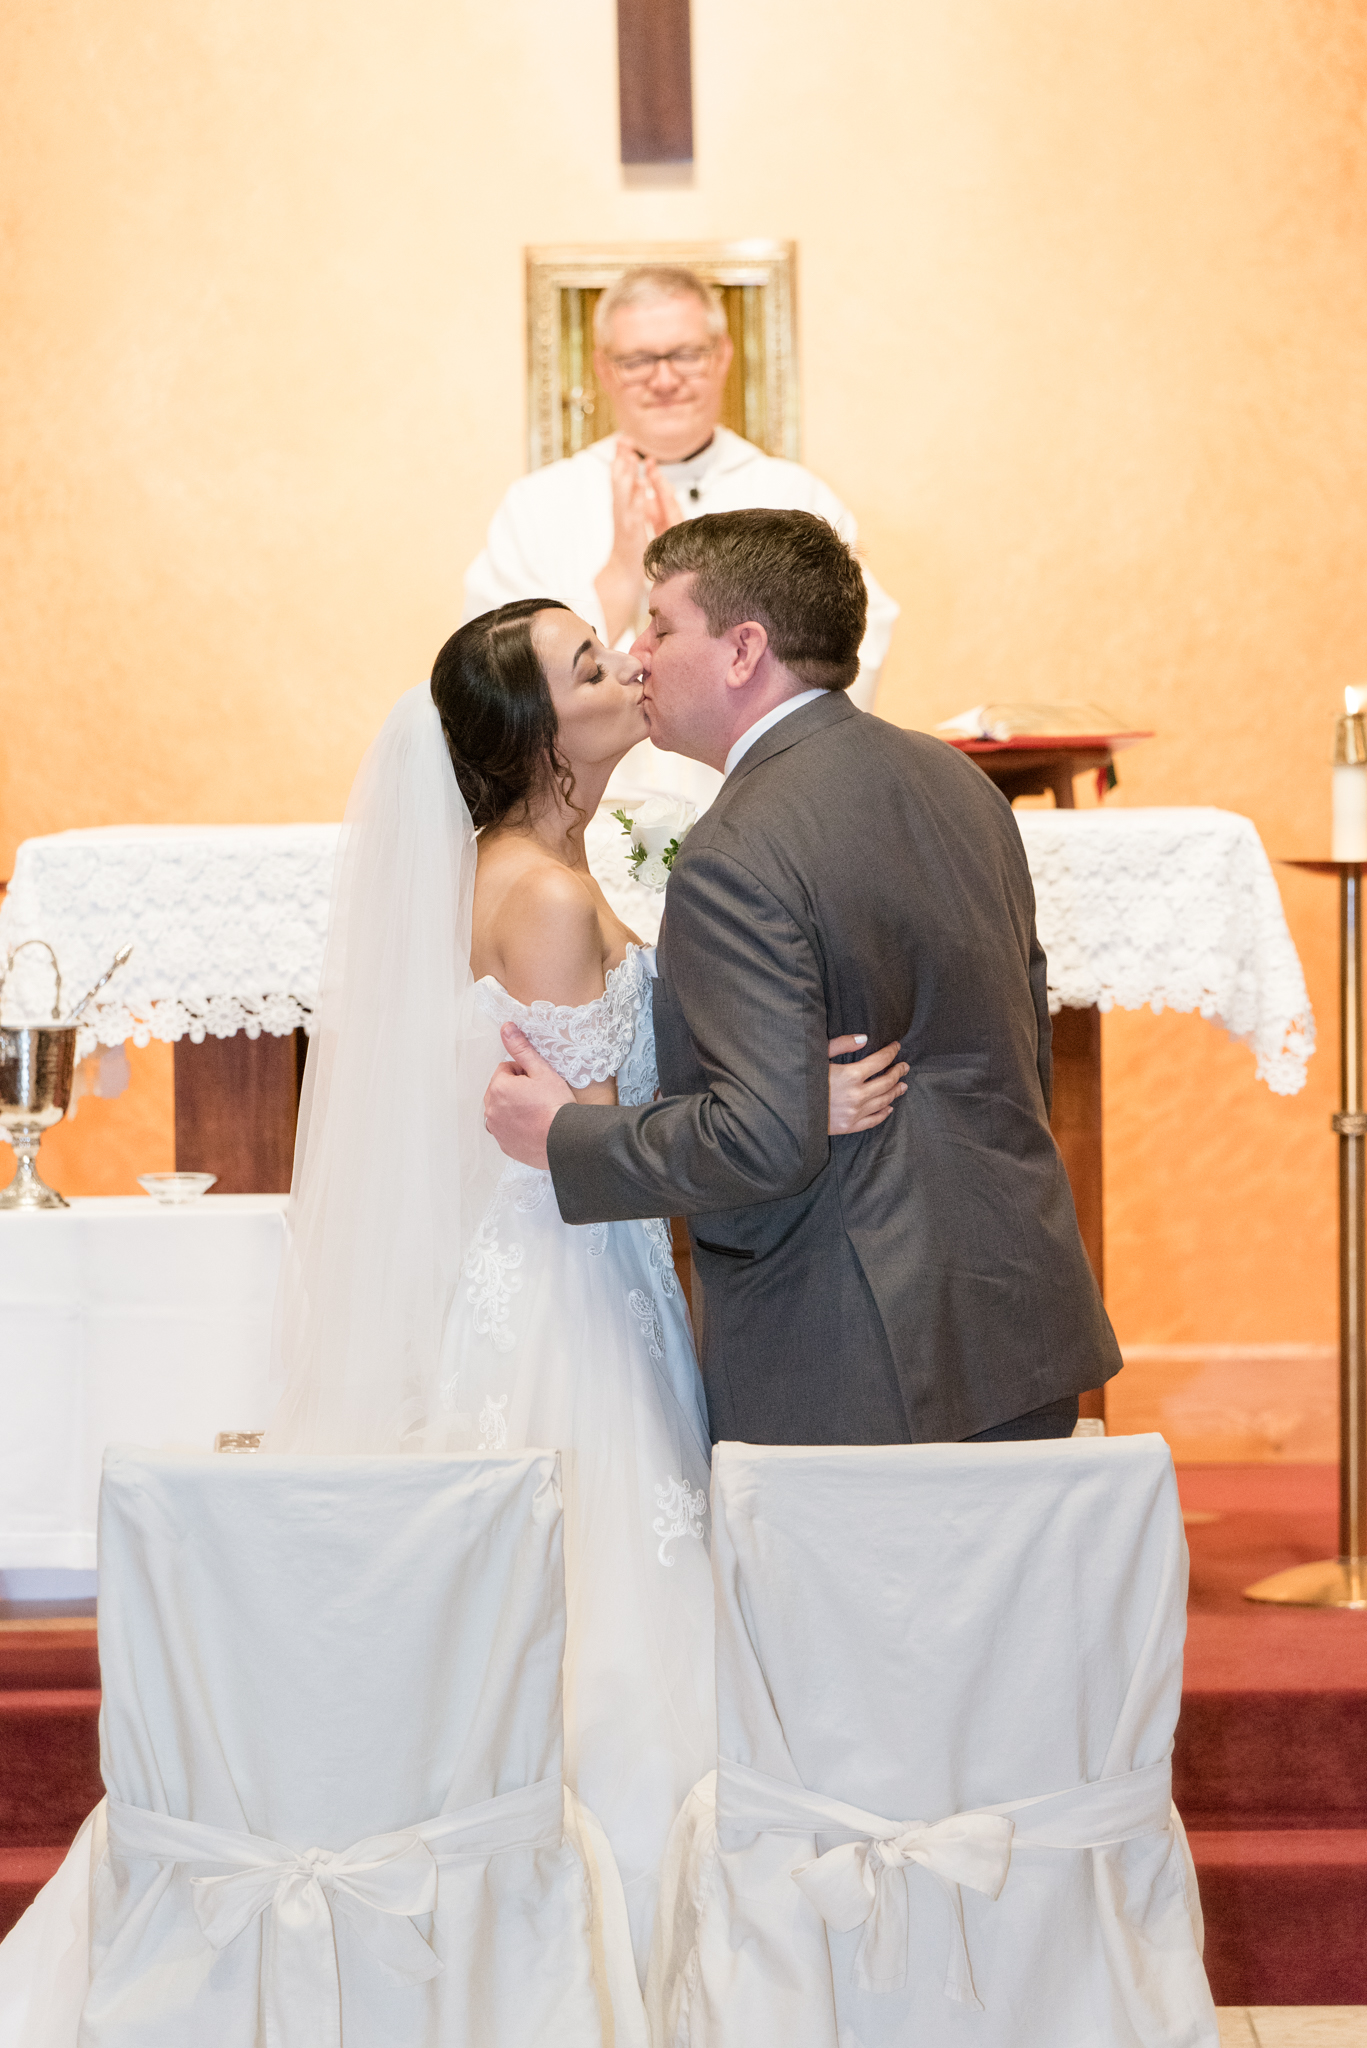 Bride and groom kiss at wedding ceremony.